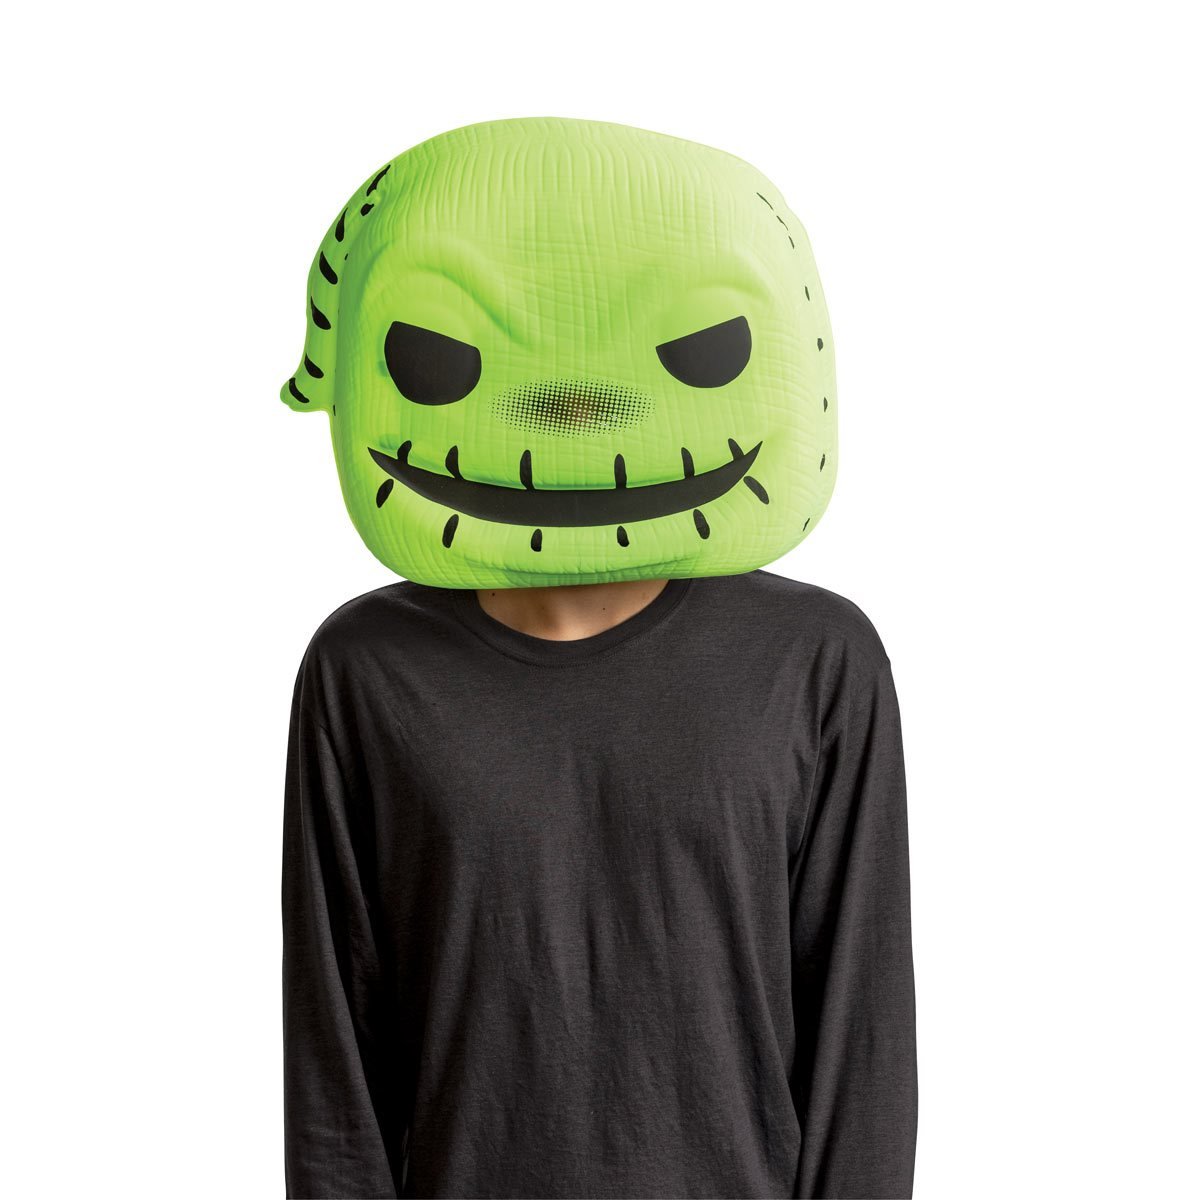 assistent nedbrydes Fortæl mig Nightmare Before Christmas Oogie Boogie Glow-in-the-Dark Funko Pop! Half- Mask - Previews Exclusive